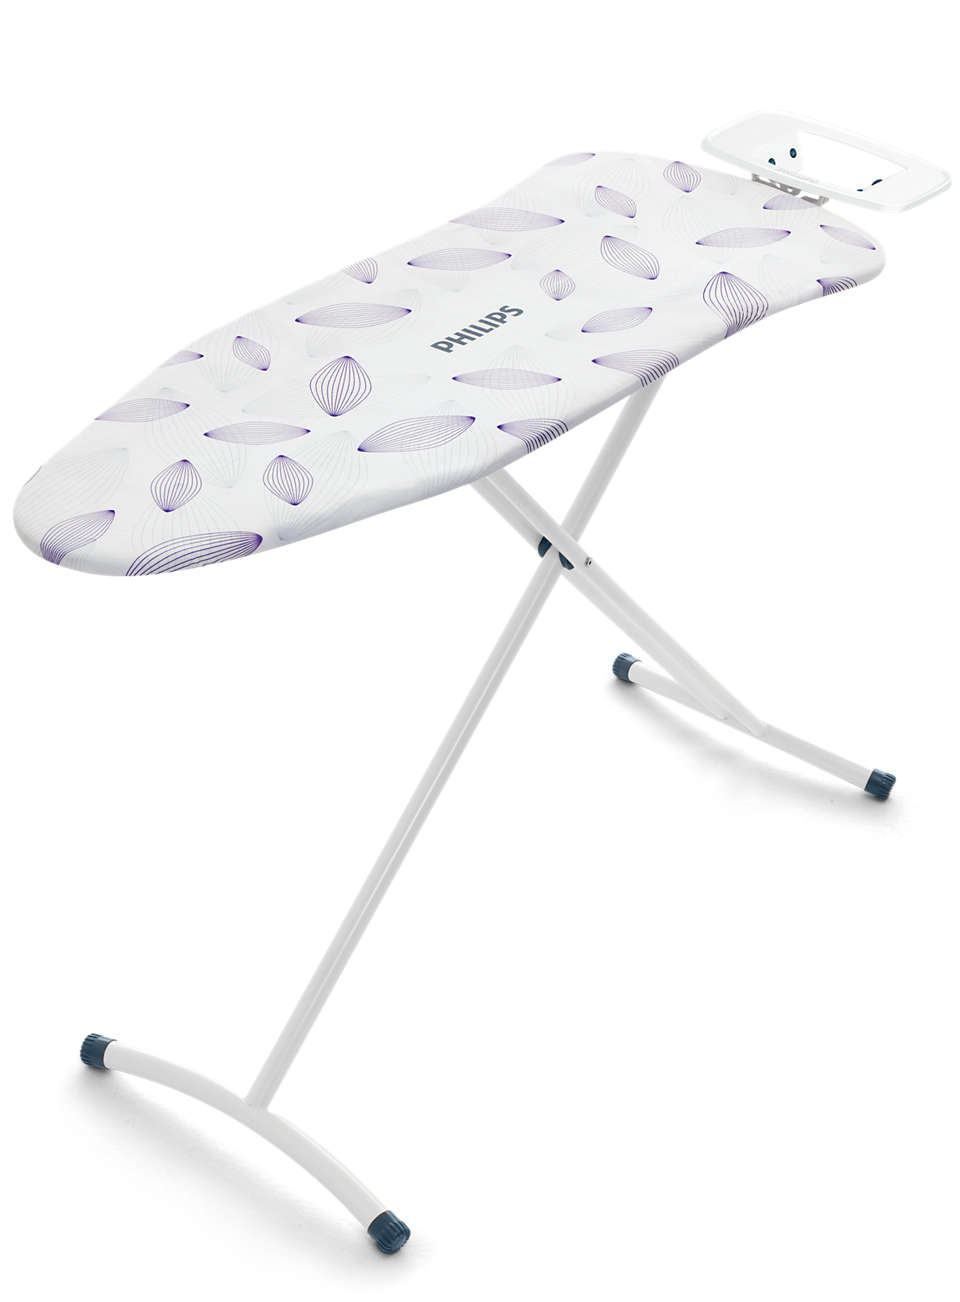 6 clever solutions for easy ironing